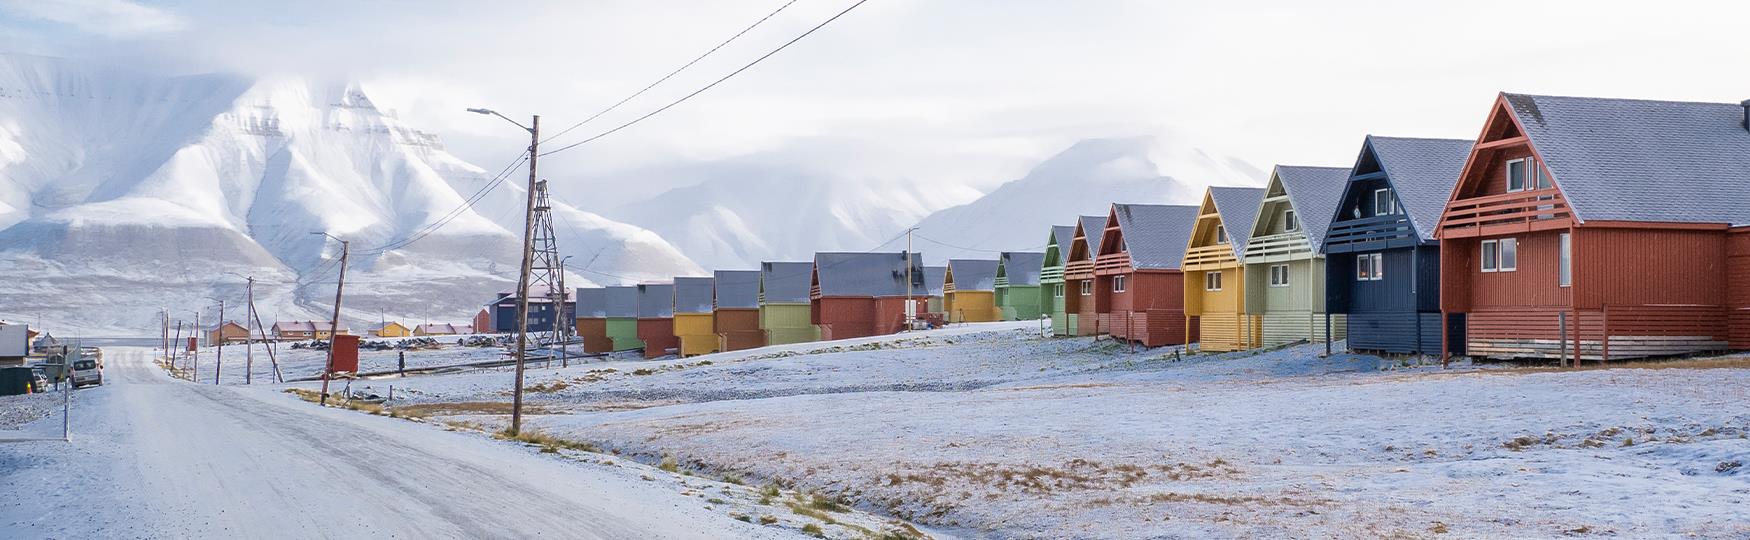 Colourful houses with snow-covered roofs